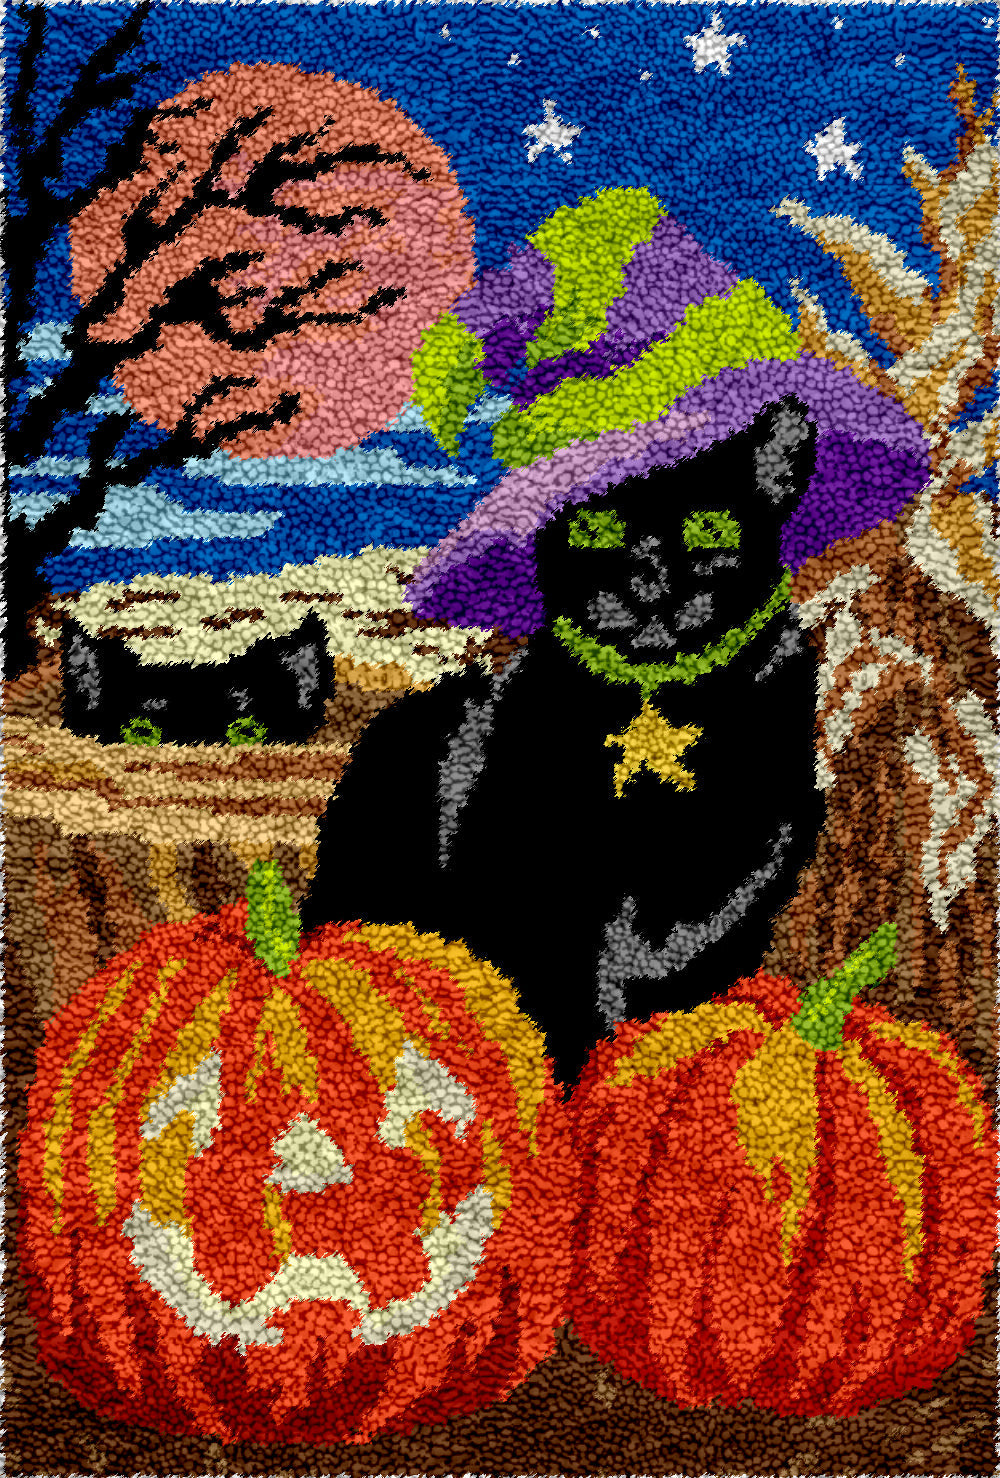 Owl Witches Halloween Rug Latch Hook Kits for Beginners